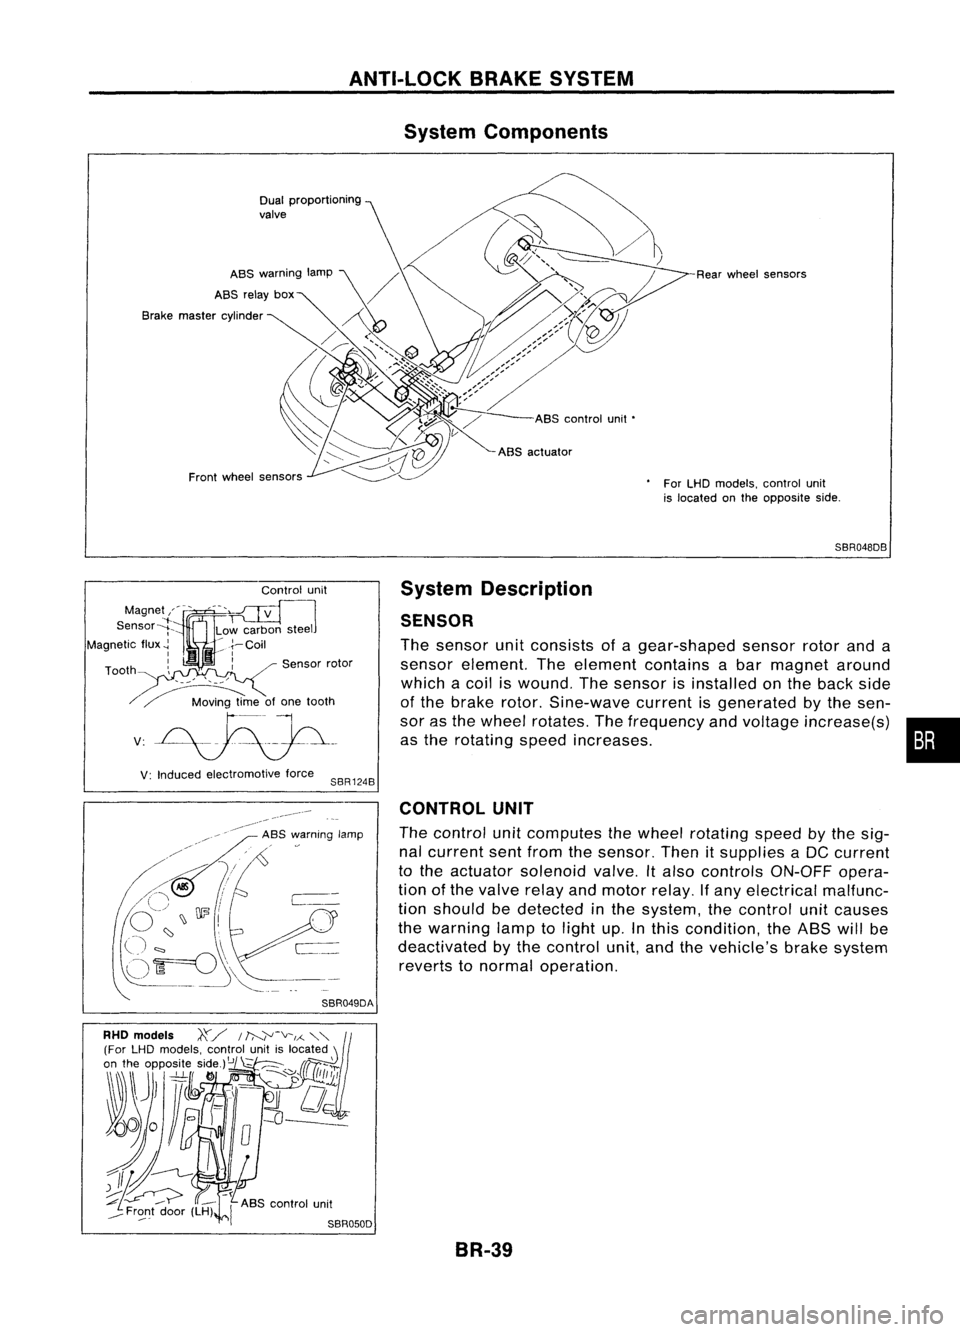 NISSAN ALMERA N15 1995  Service Manual ANTI-LOCKBRAKESYSTEM
System Components

Dual proportioning
valve
Rearwheel sensors
For LHD models, controlunit
is located onthe opposite side.

SBR048DB

Control unit

s::';o~'~W. 
r<ca!bvJste